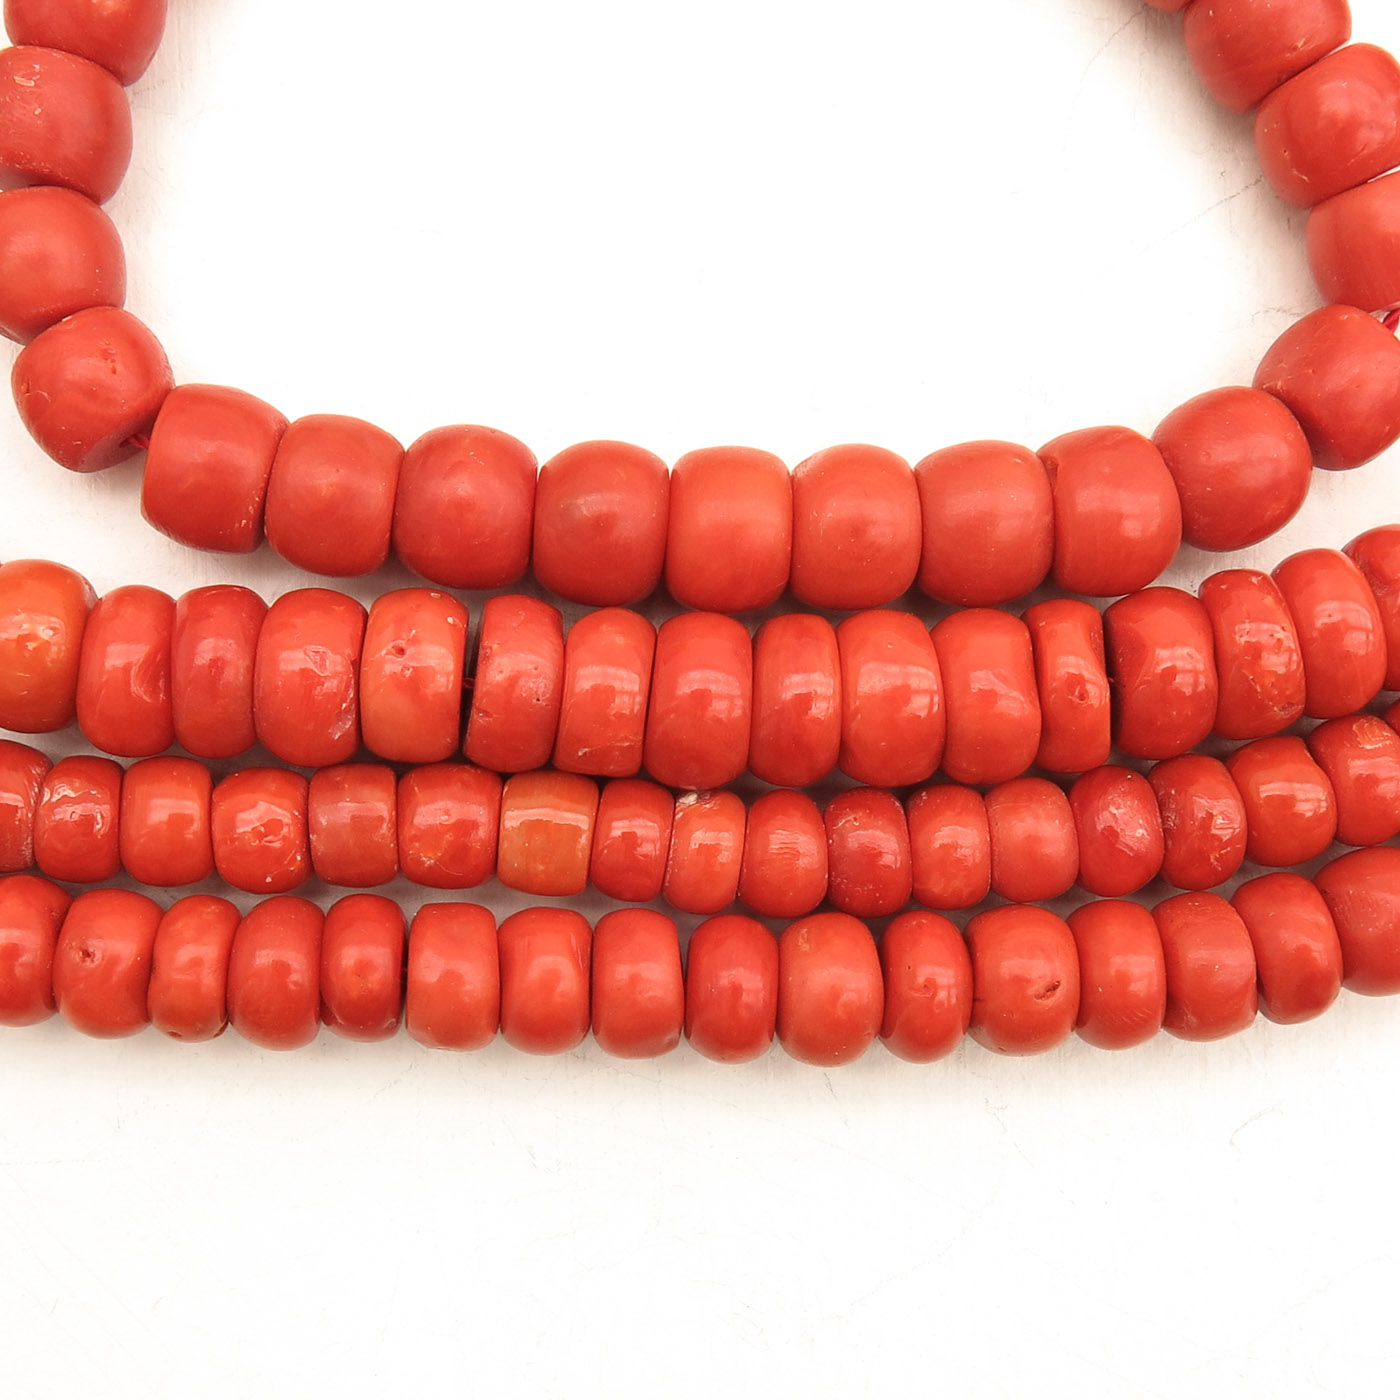 Three Red Coral Necklaces and One Bracelet - Image 2 of 2